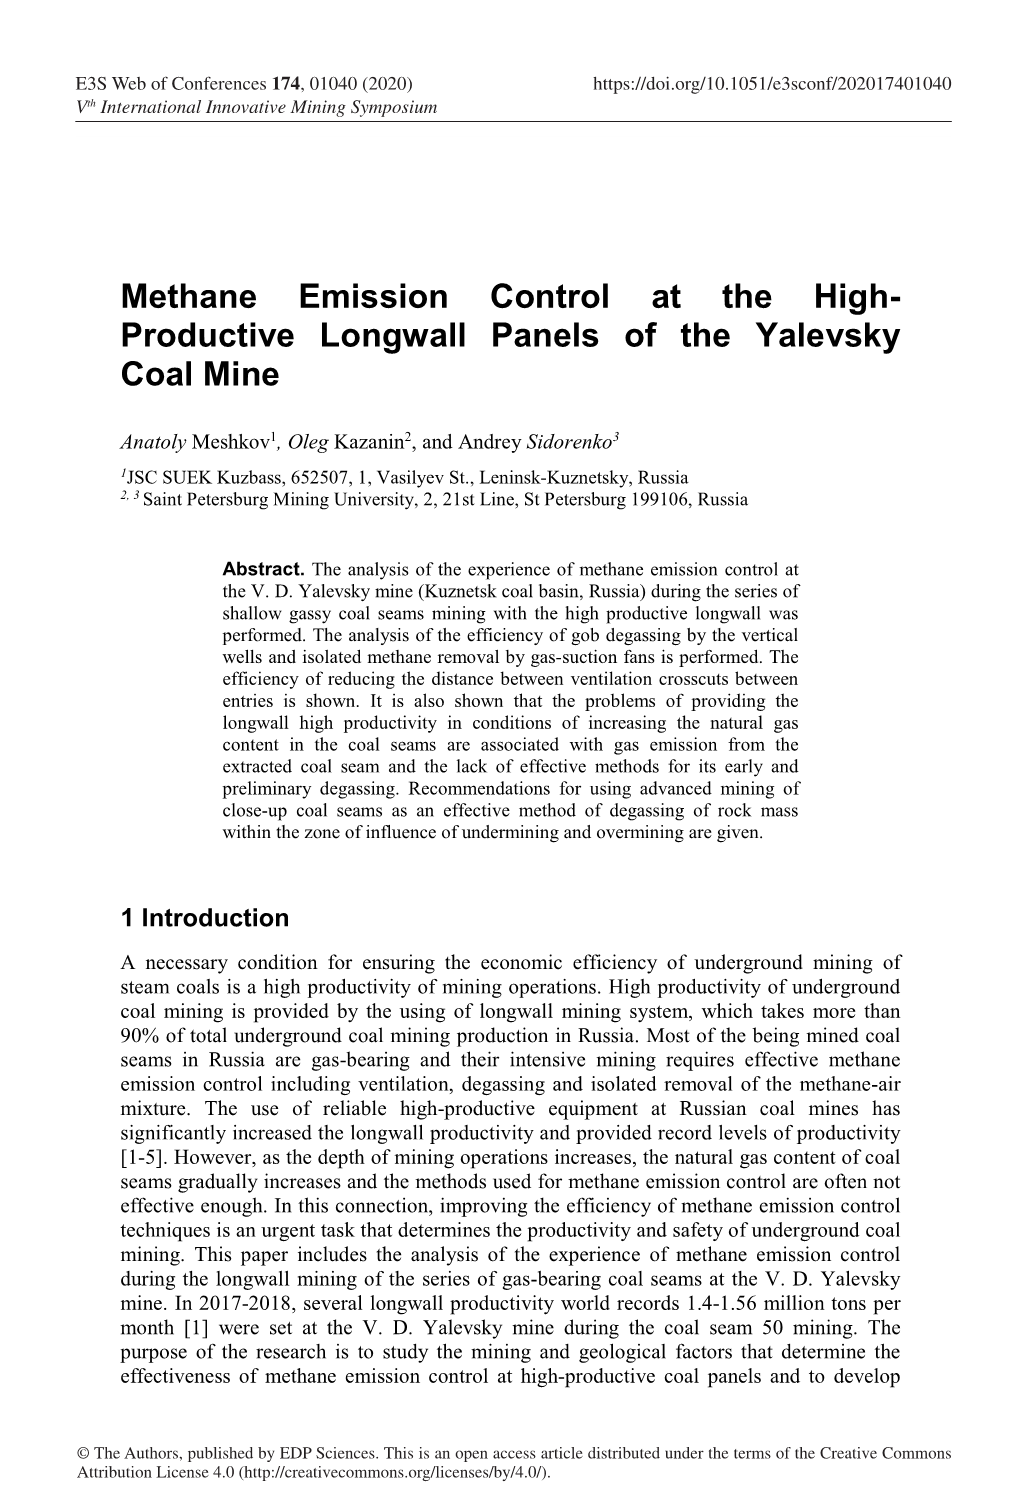 Methane Emission Control at the High-Productive Longwall Panels Of